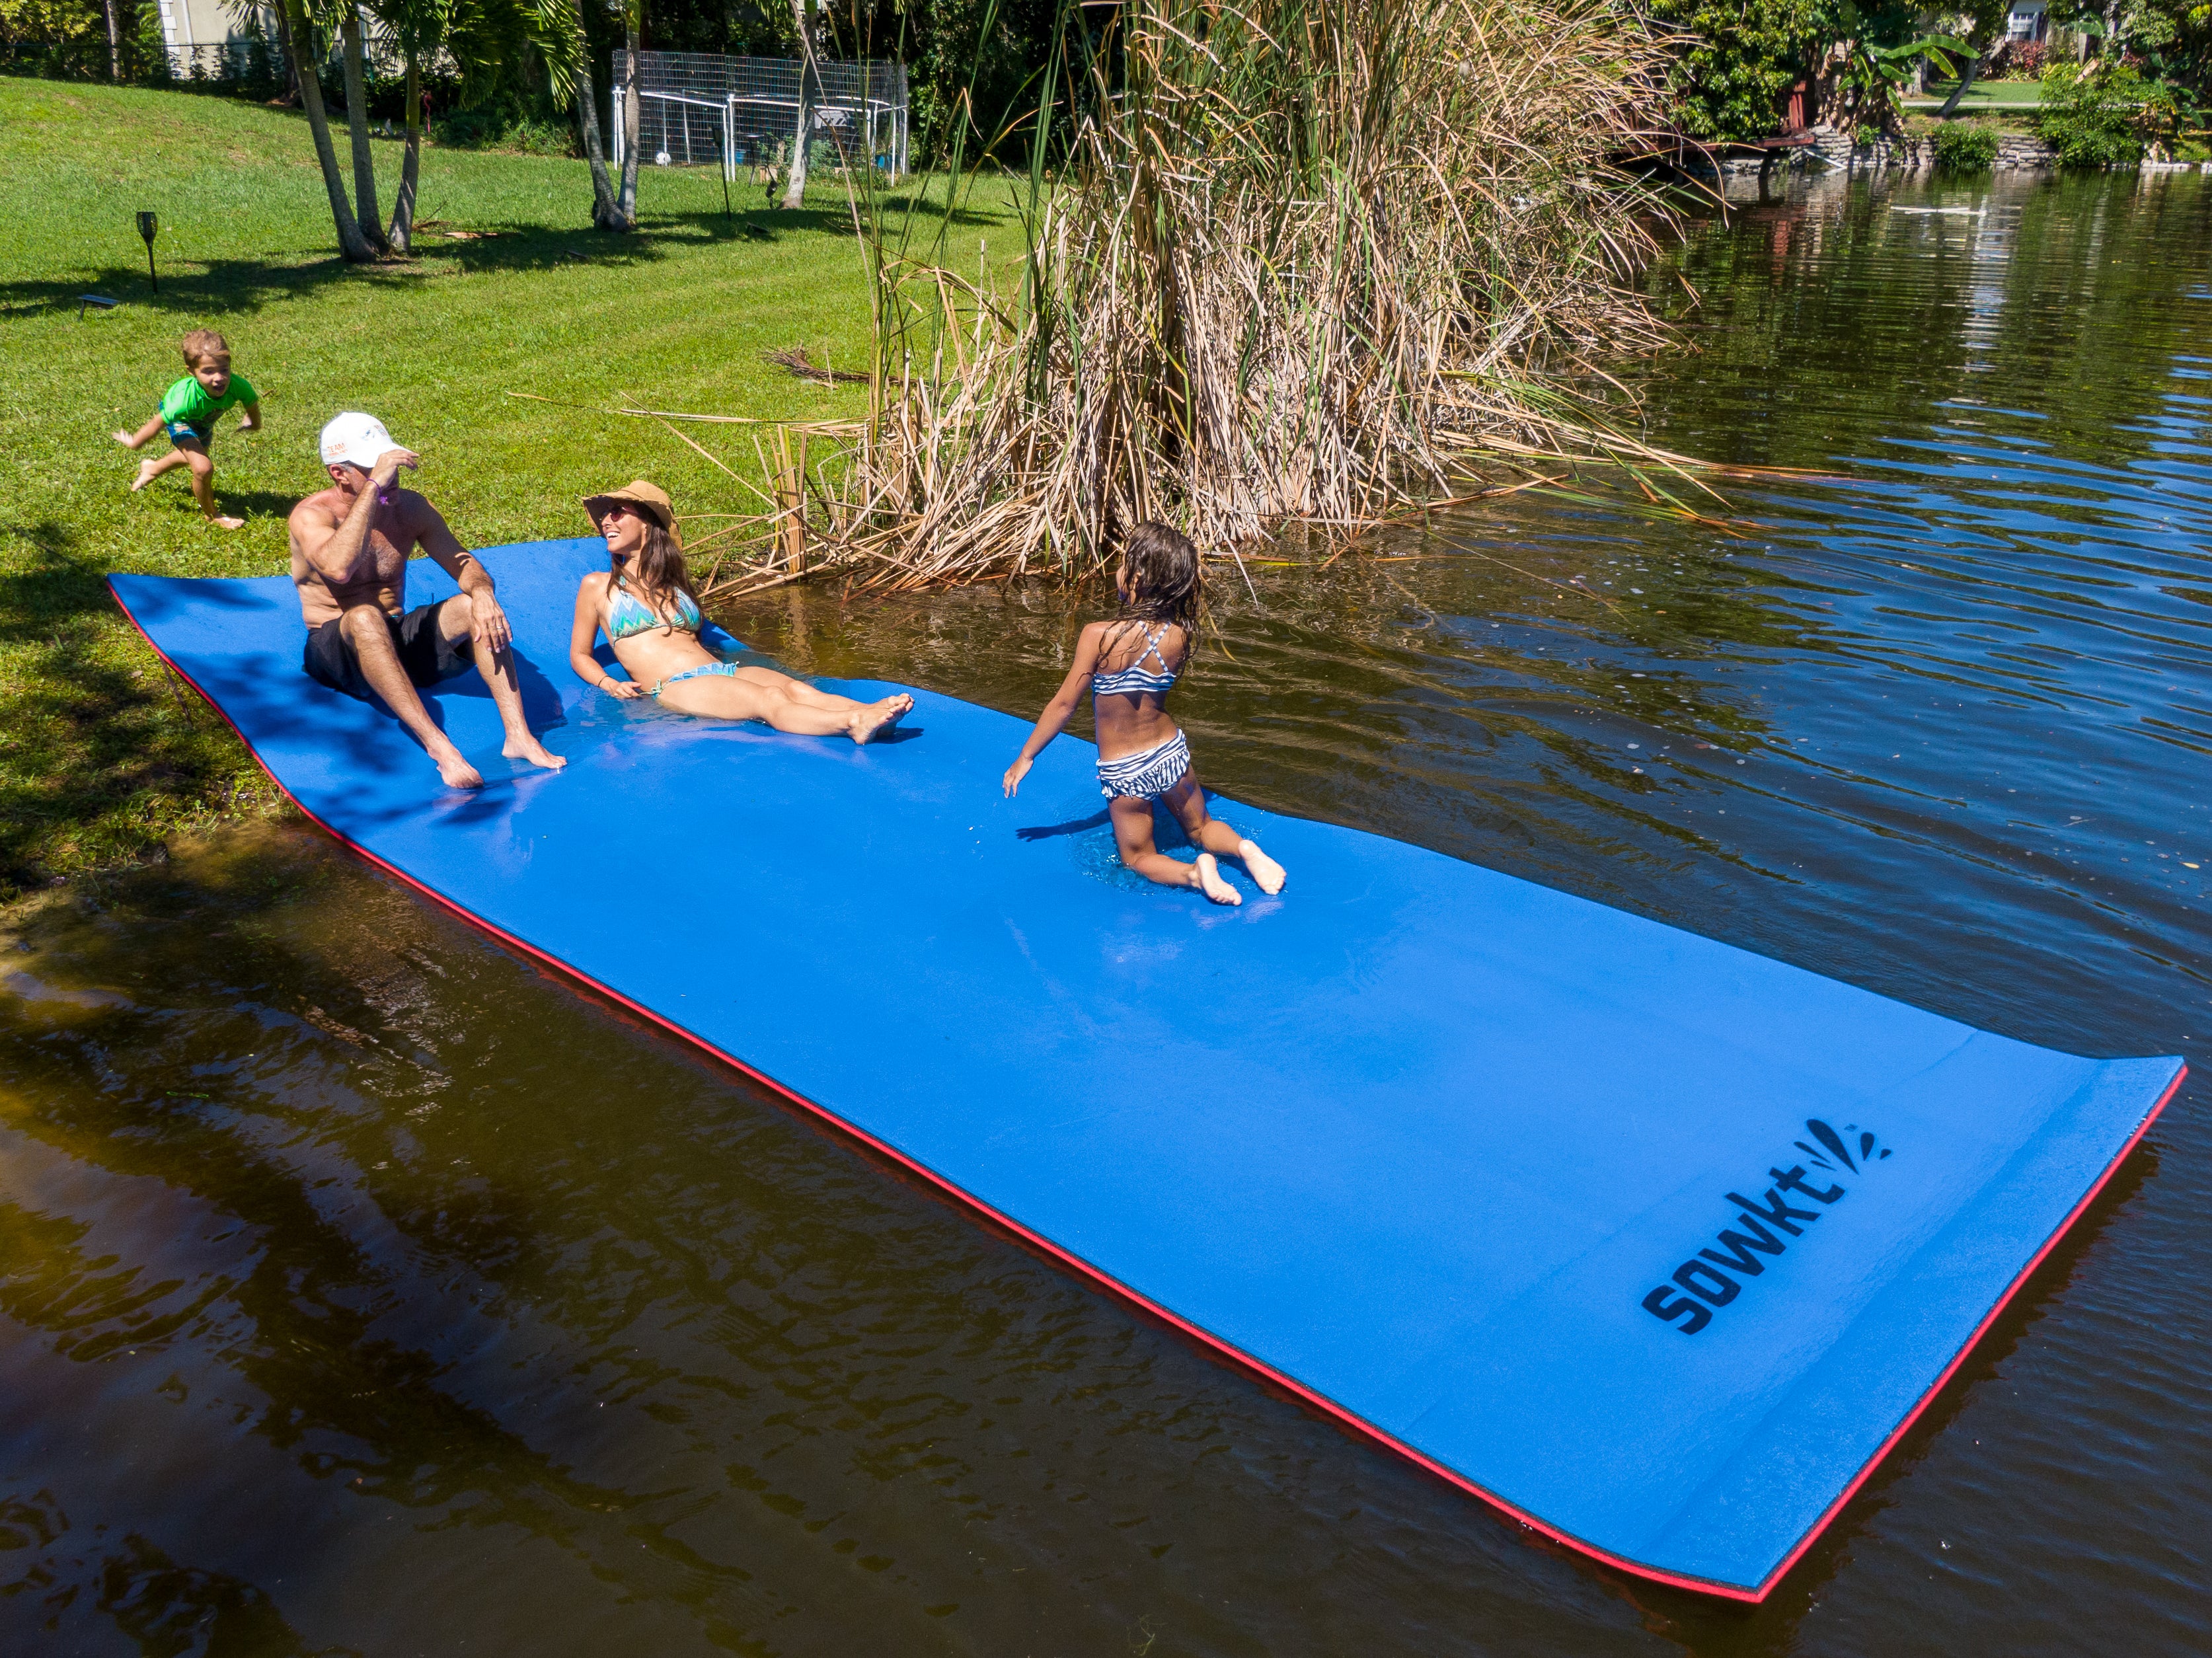 SOWKT Newest Model 18 x 6 Feet Floating Water Mat - Floating Island for Lakes or Pools - Giant Pool Float Holds Up to 8 Adults or 20 Kids. Unlimited